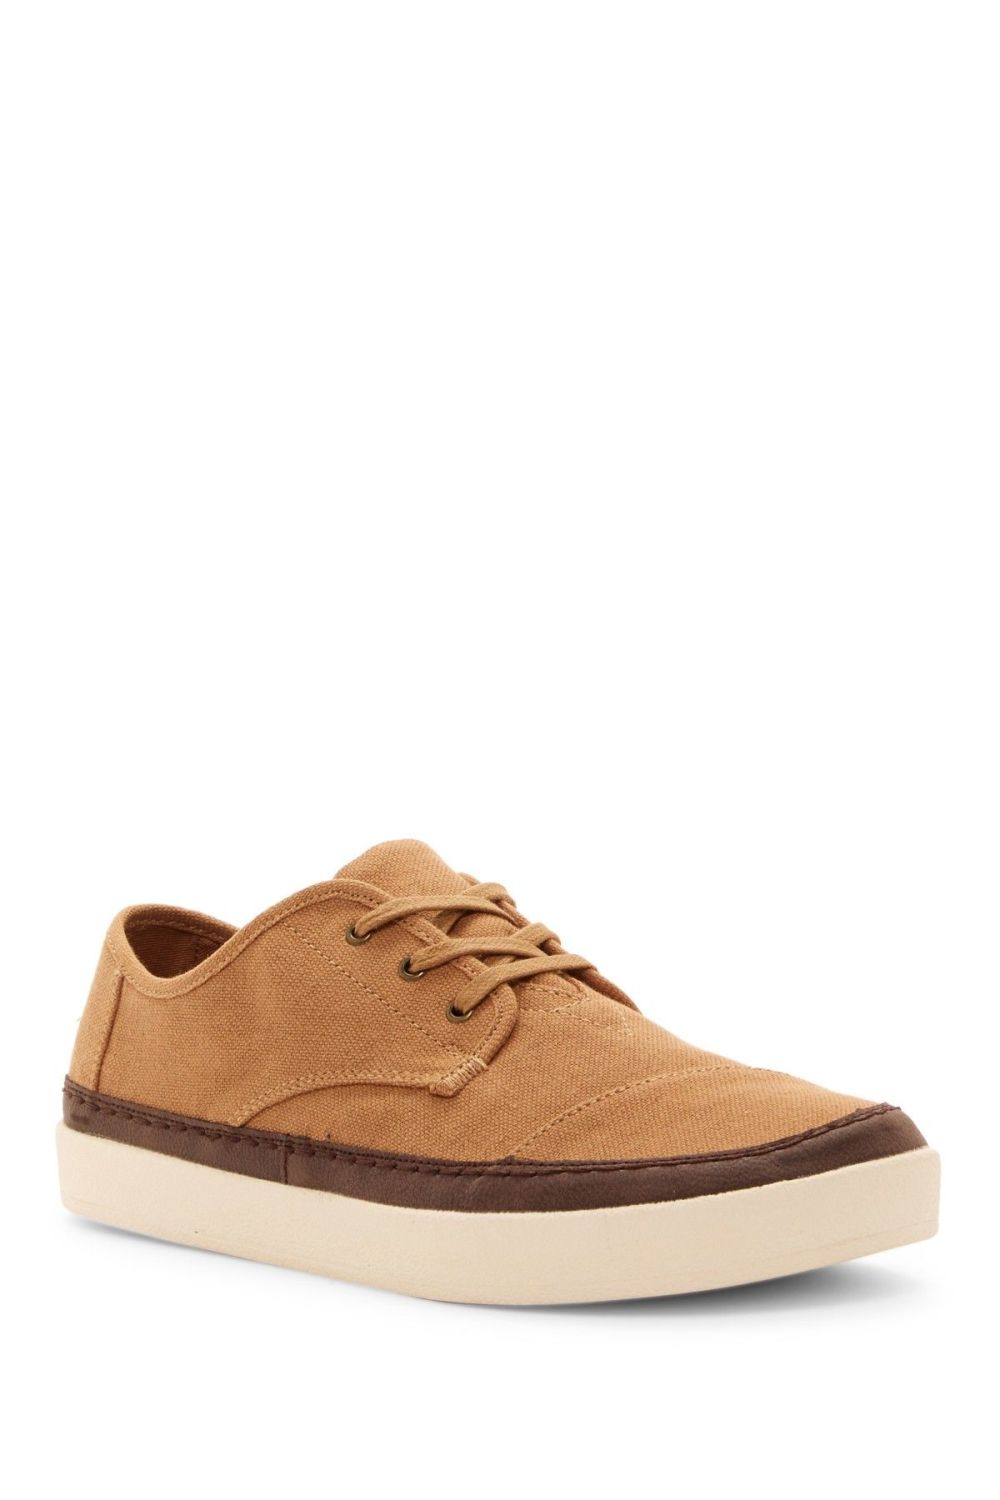 Toms Lace-up Canvas Sneaker Size: 8